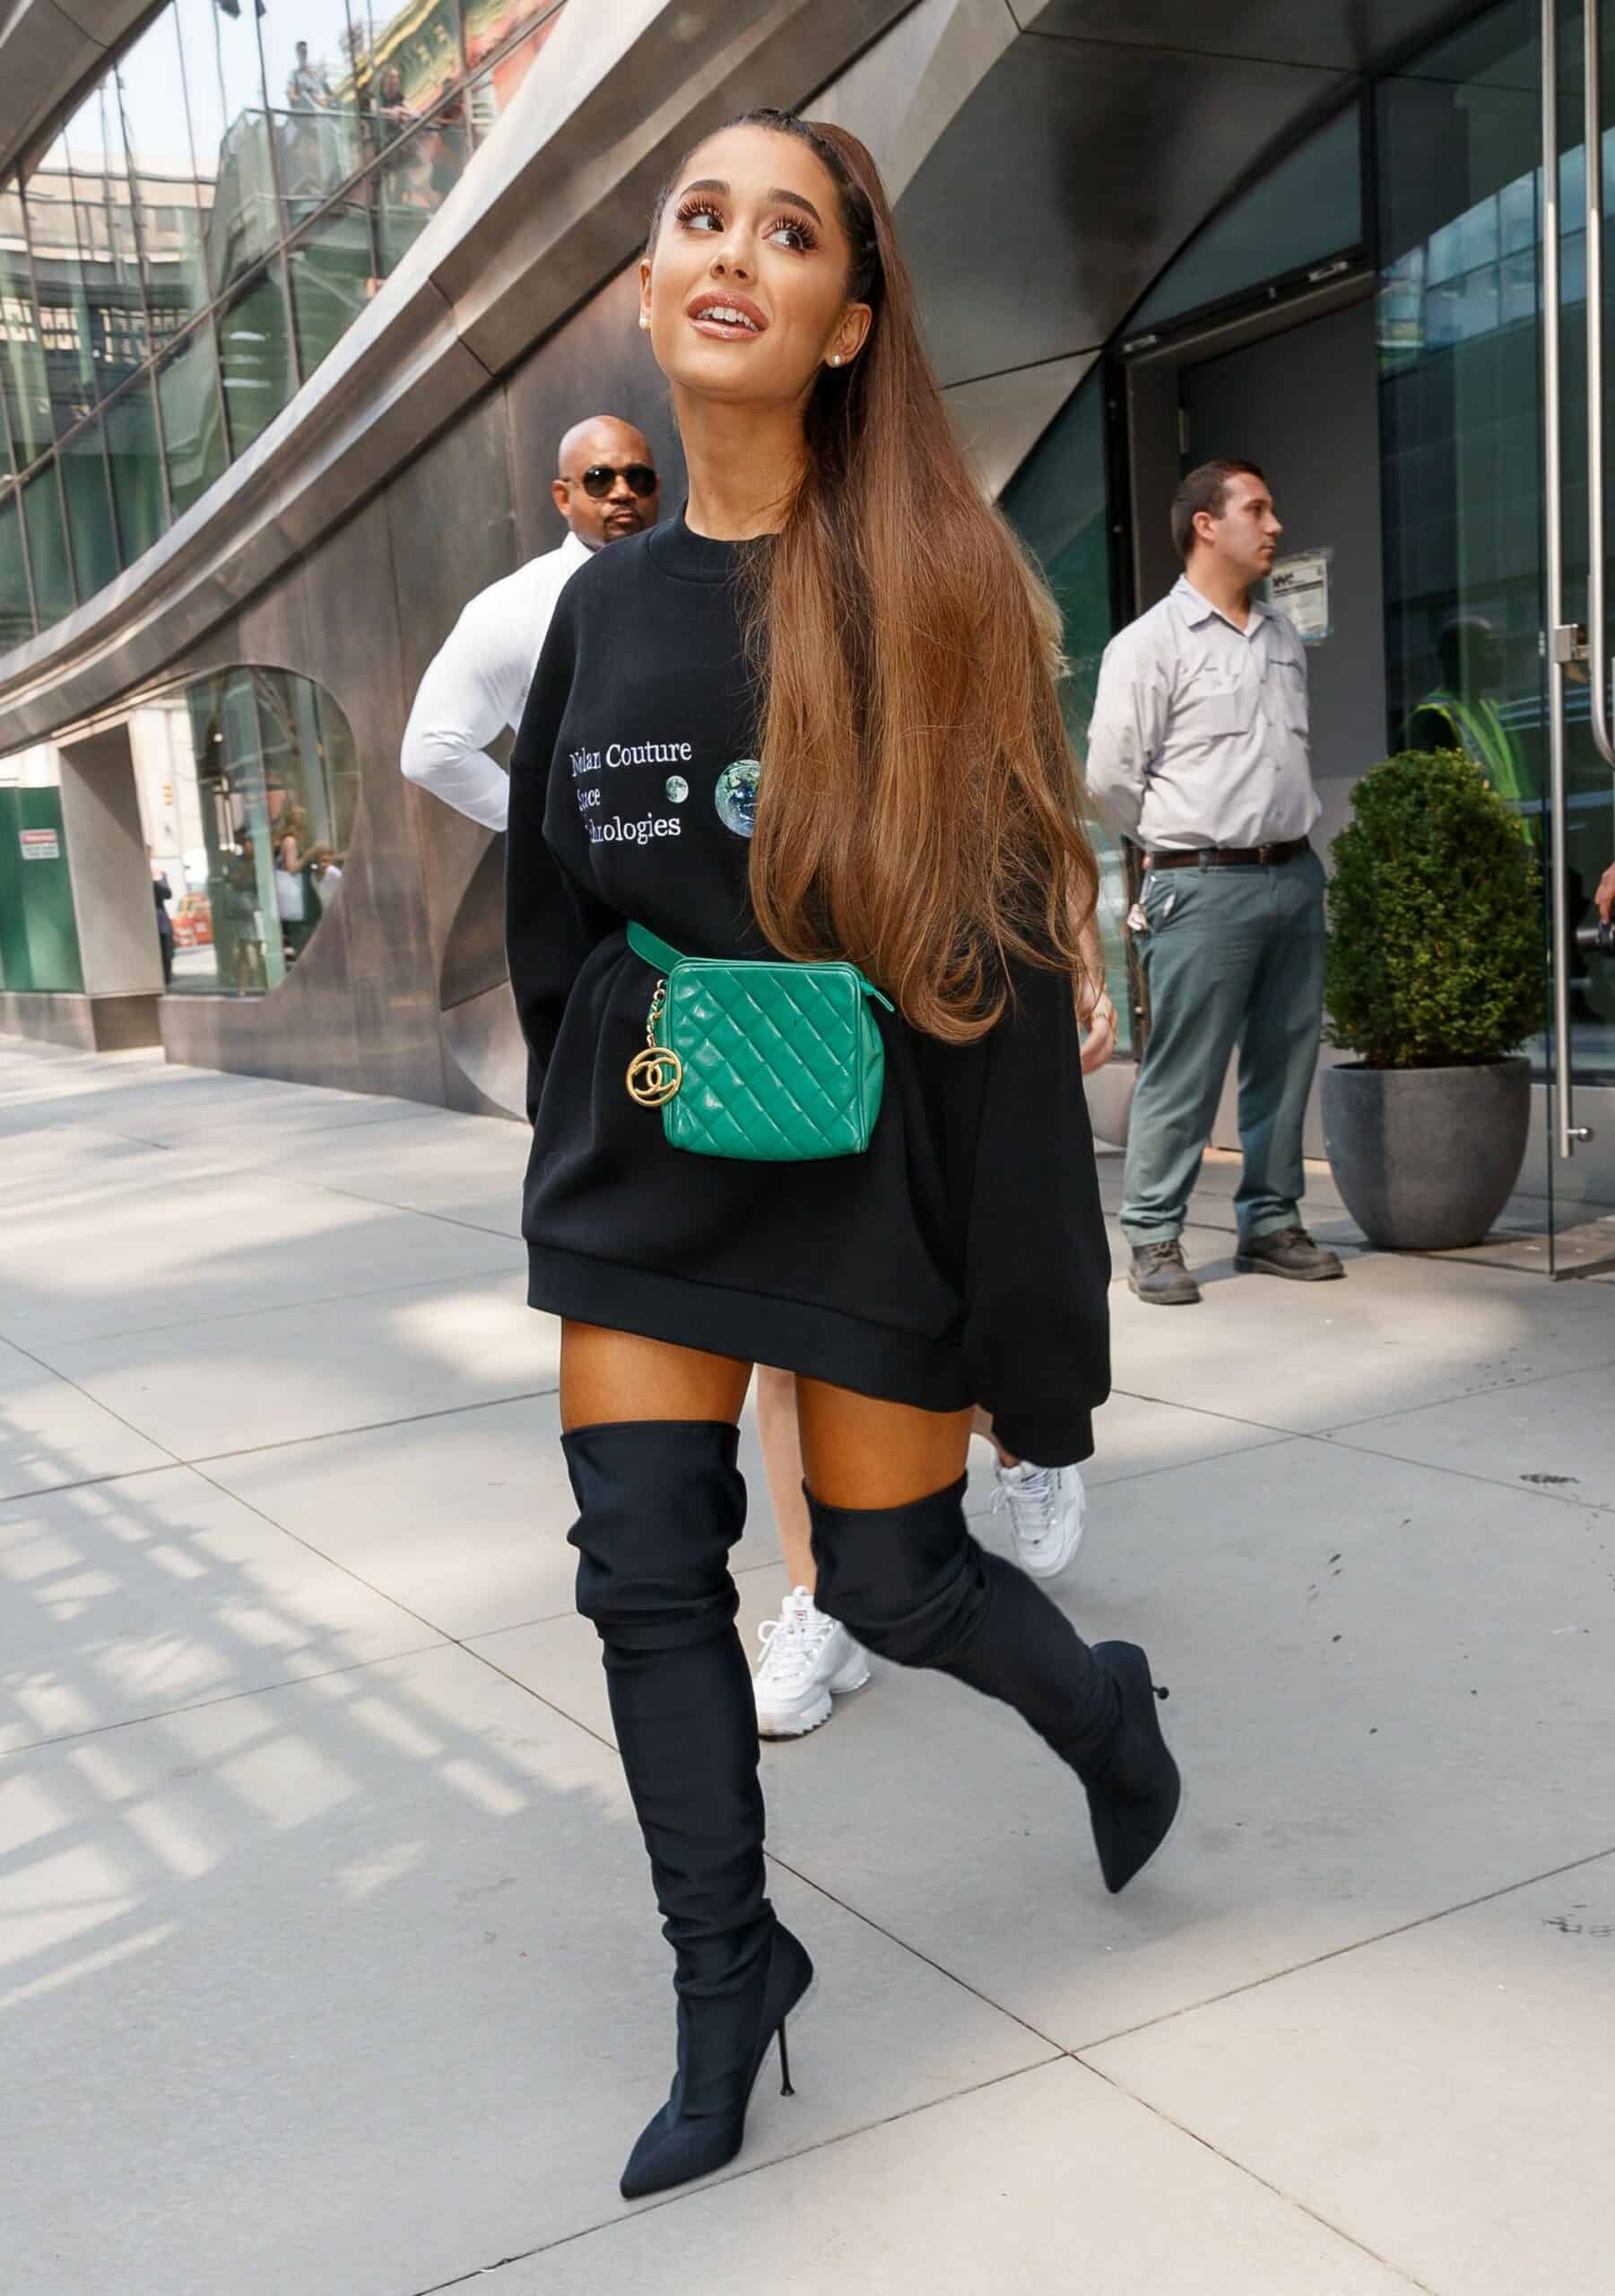 Ariana Grande Legging Outfits Styling Inspiration - The New York Banner